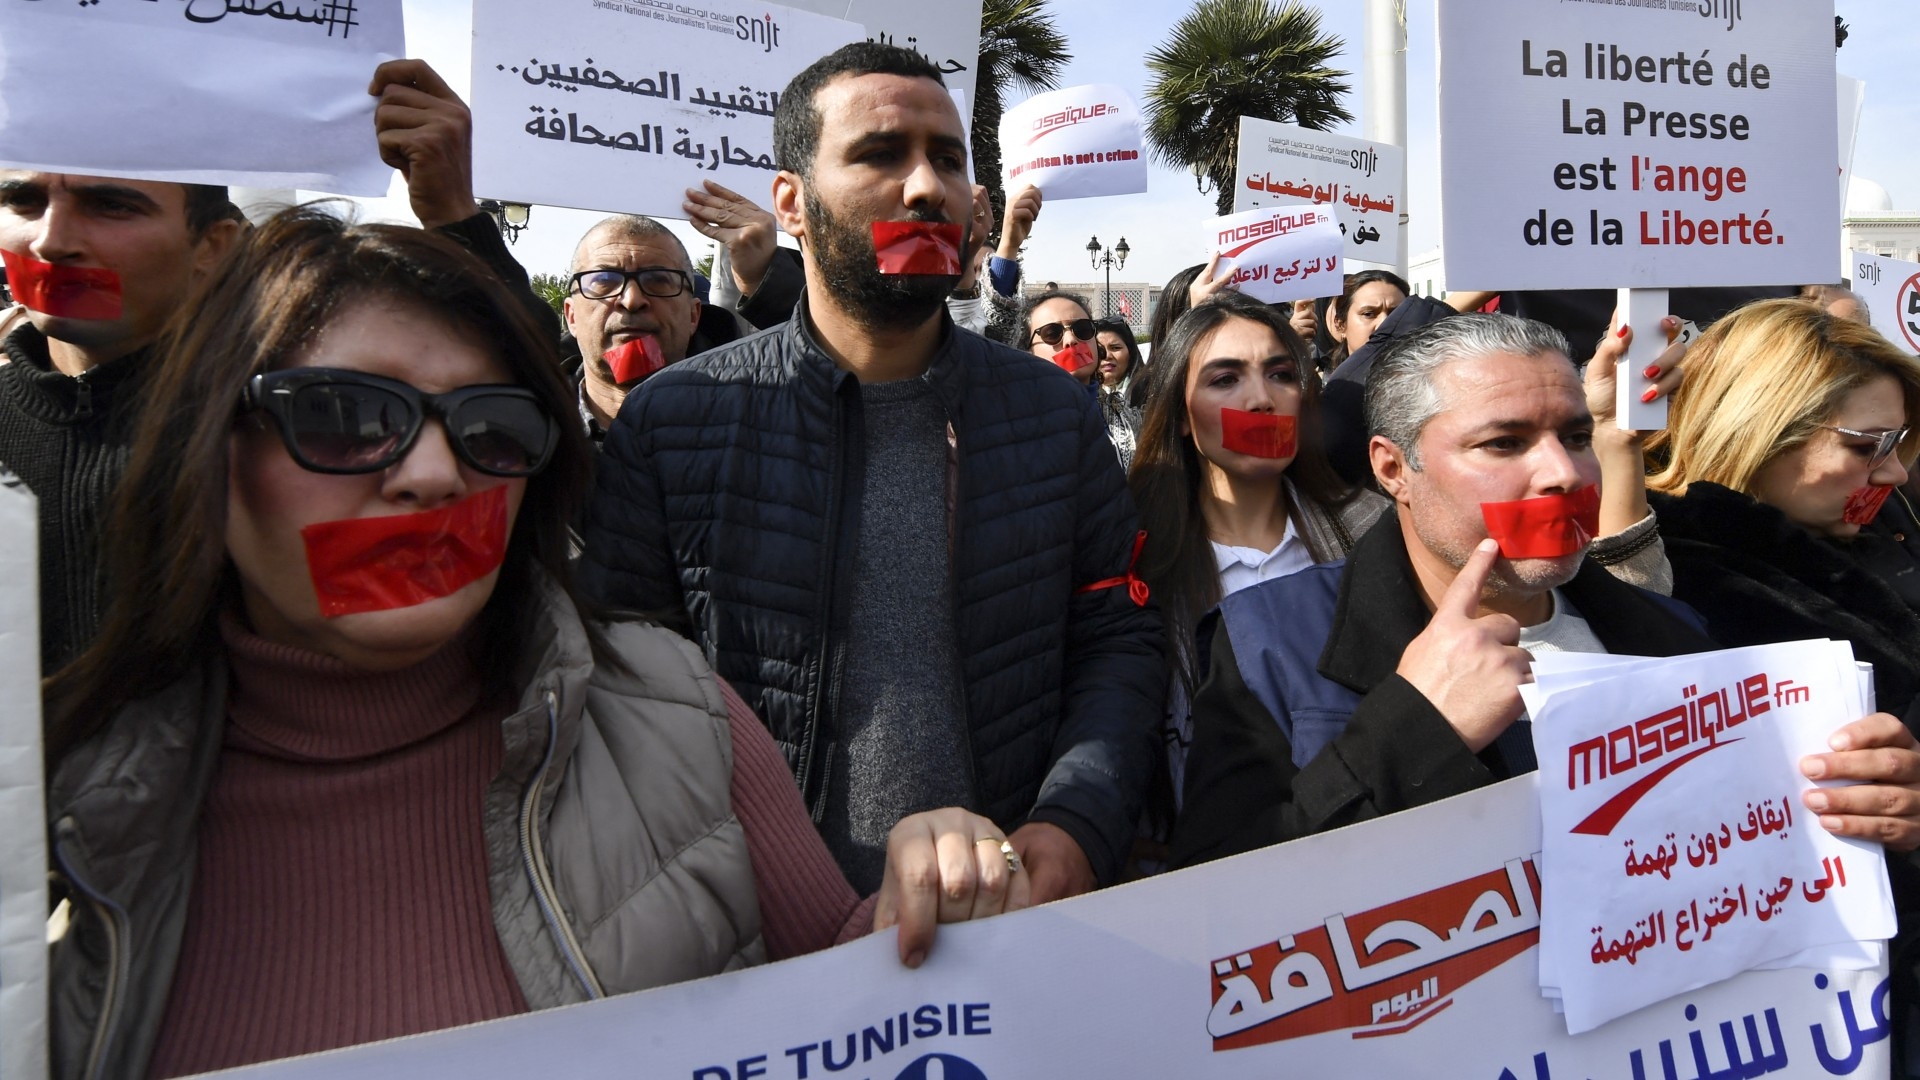 Tunisian journalists cover their mouths with red tape as they protest in front of the Prime Minister's office in the capital Tunis on 16 February 2023 (AFP)